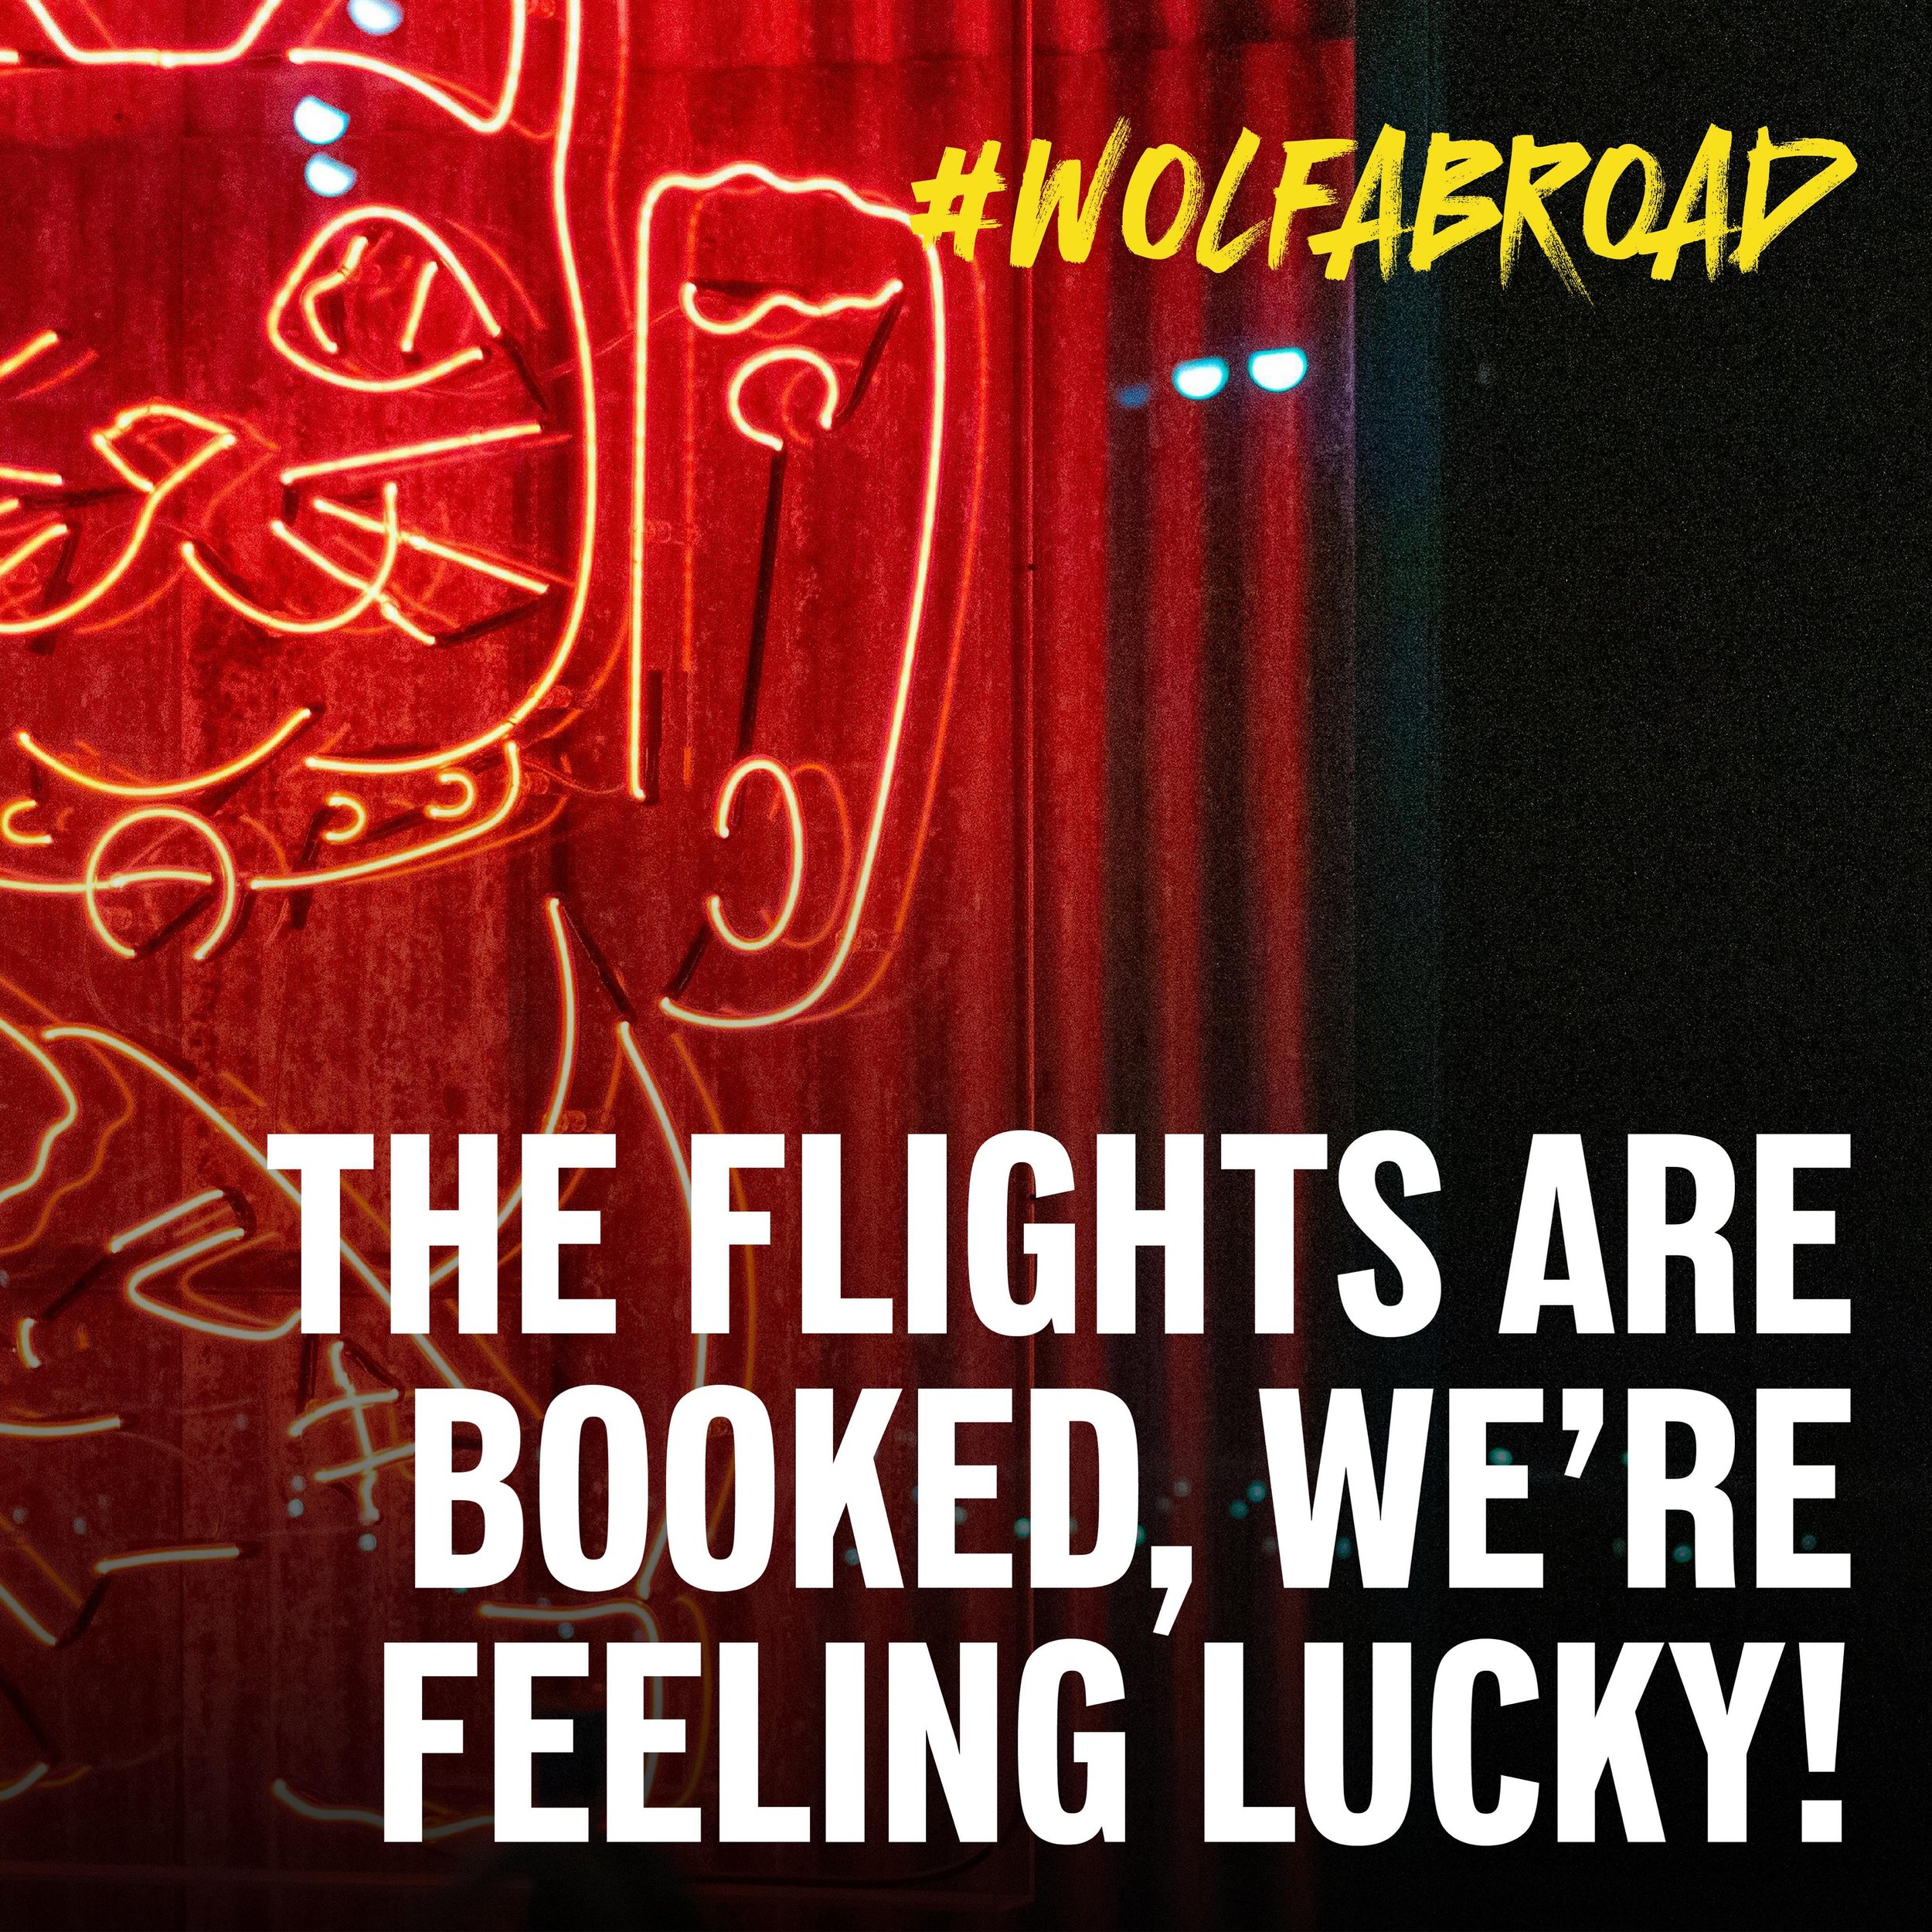 The neon lights are calling us! #Wolfabroad #Wolfinthewild #Outoftheden